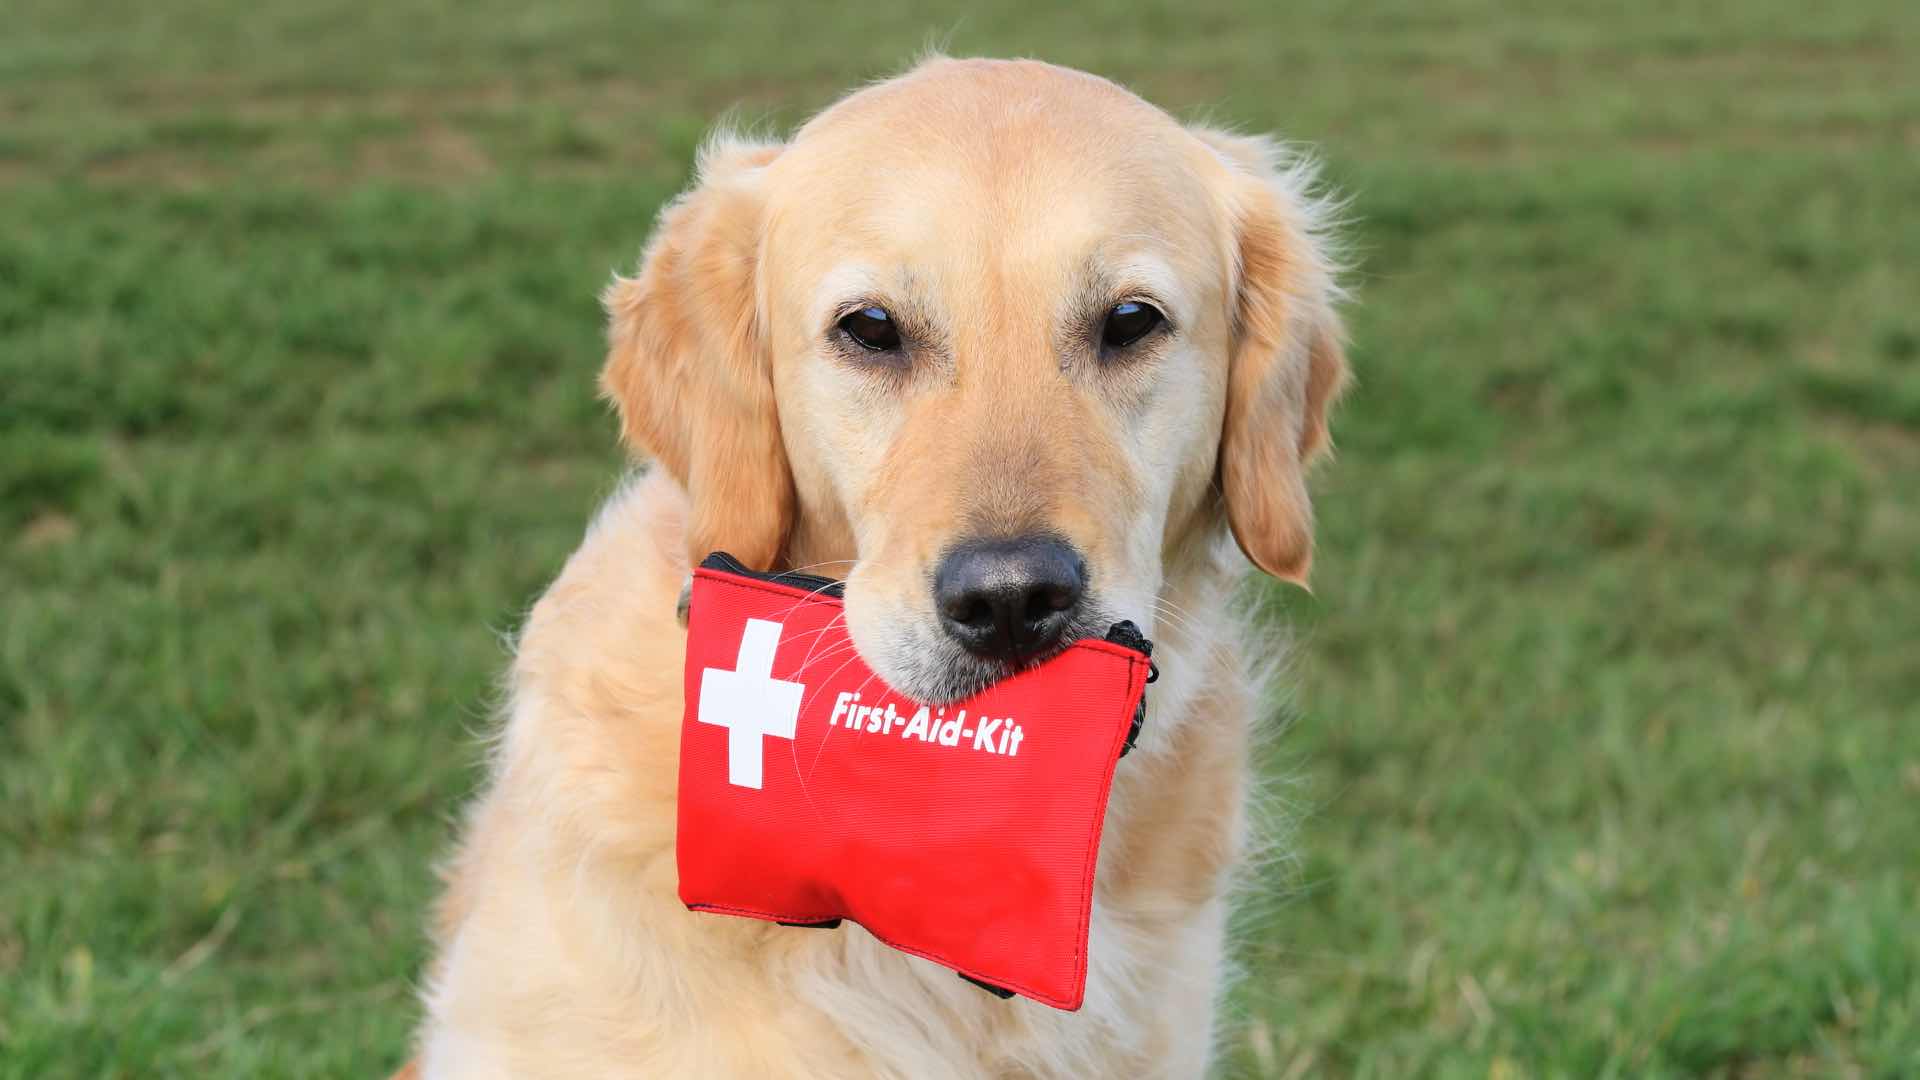 Dog having First aid bag in its mouth